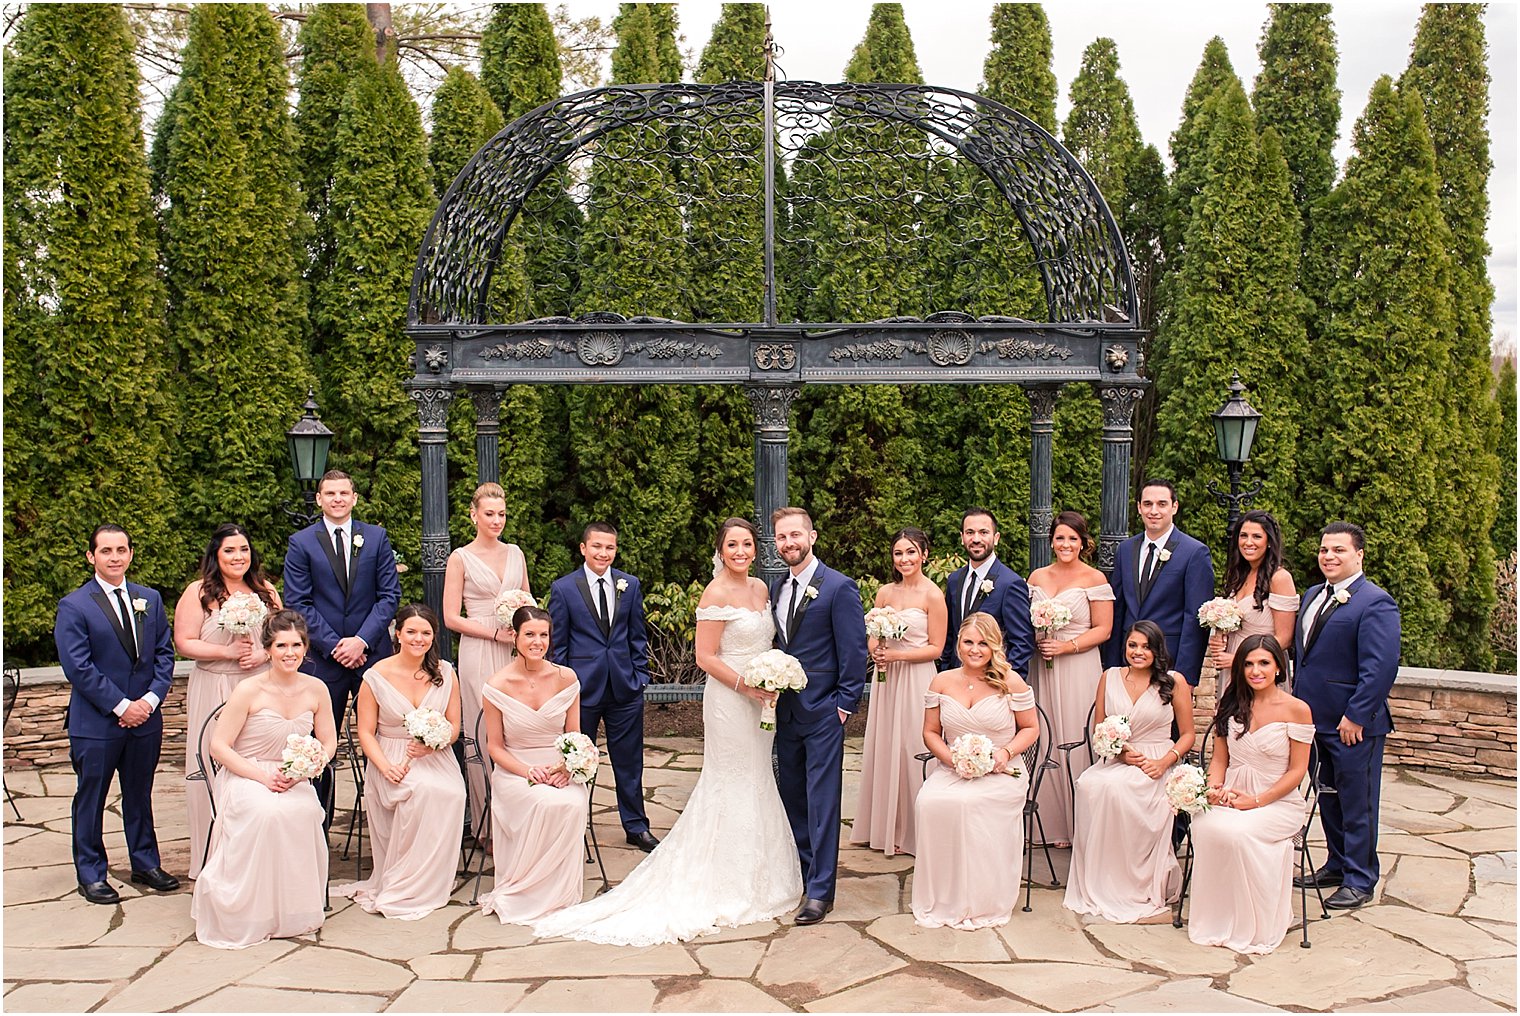 How to pose a large bridal party